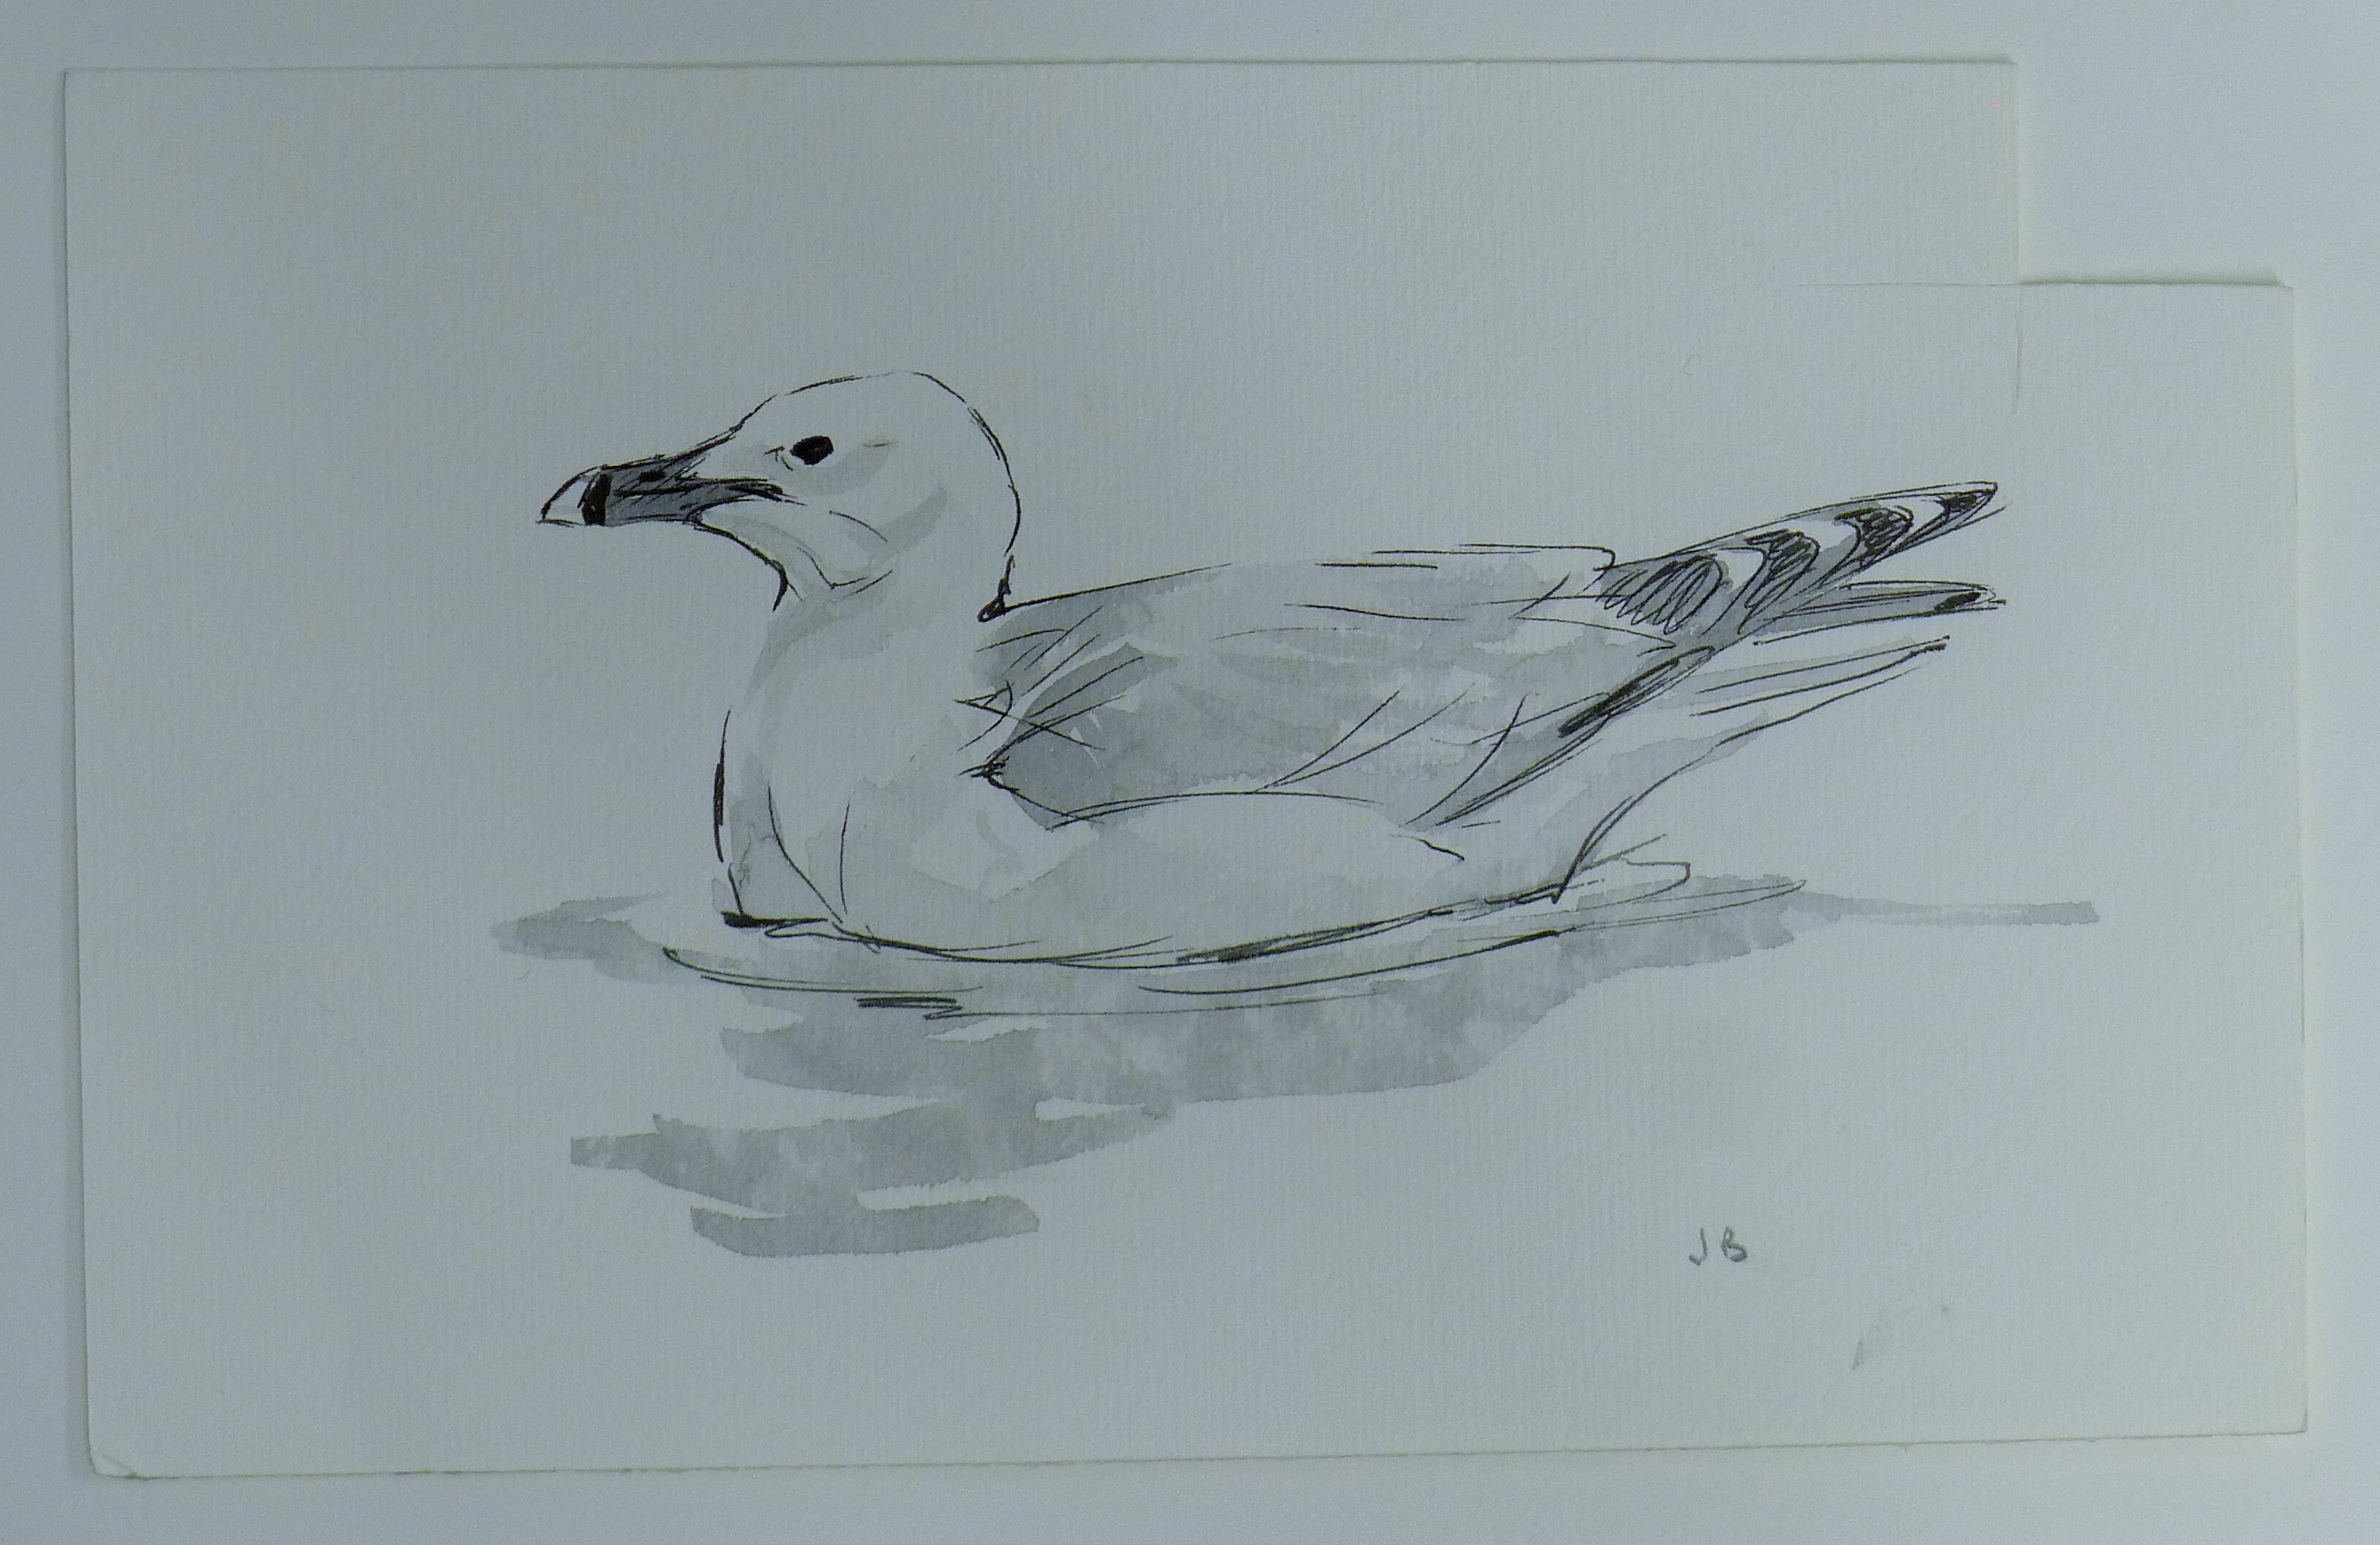 BUSBY, JOHN (1928-2015) British (AR), Seven Sketches of Birds, pencil, all signed or initialled. - Image 21 of 22